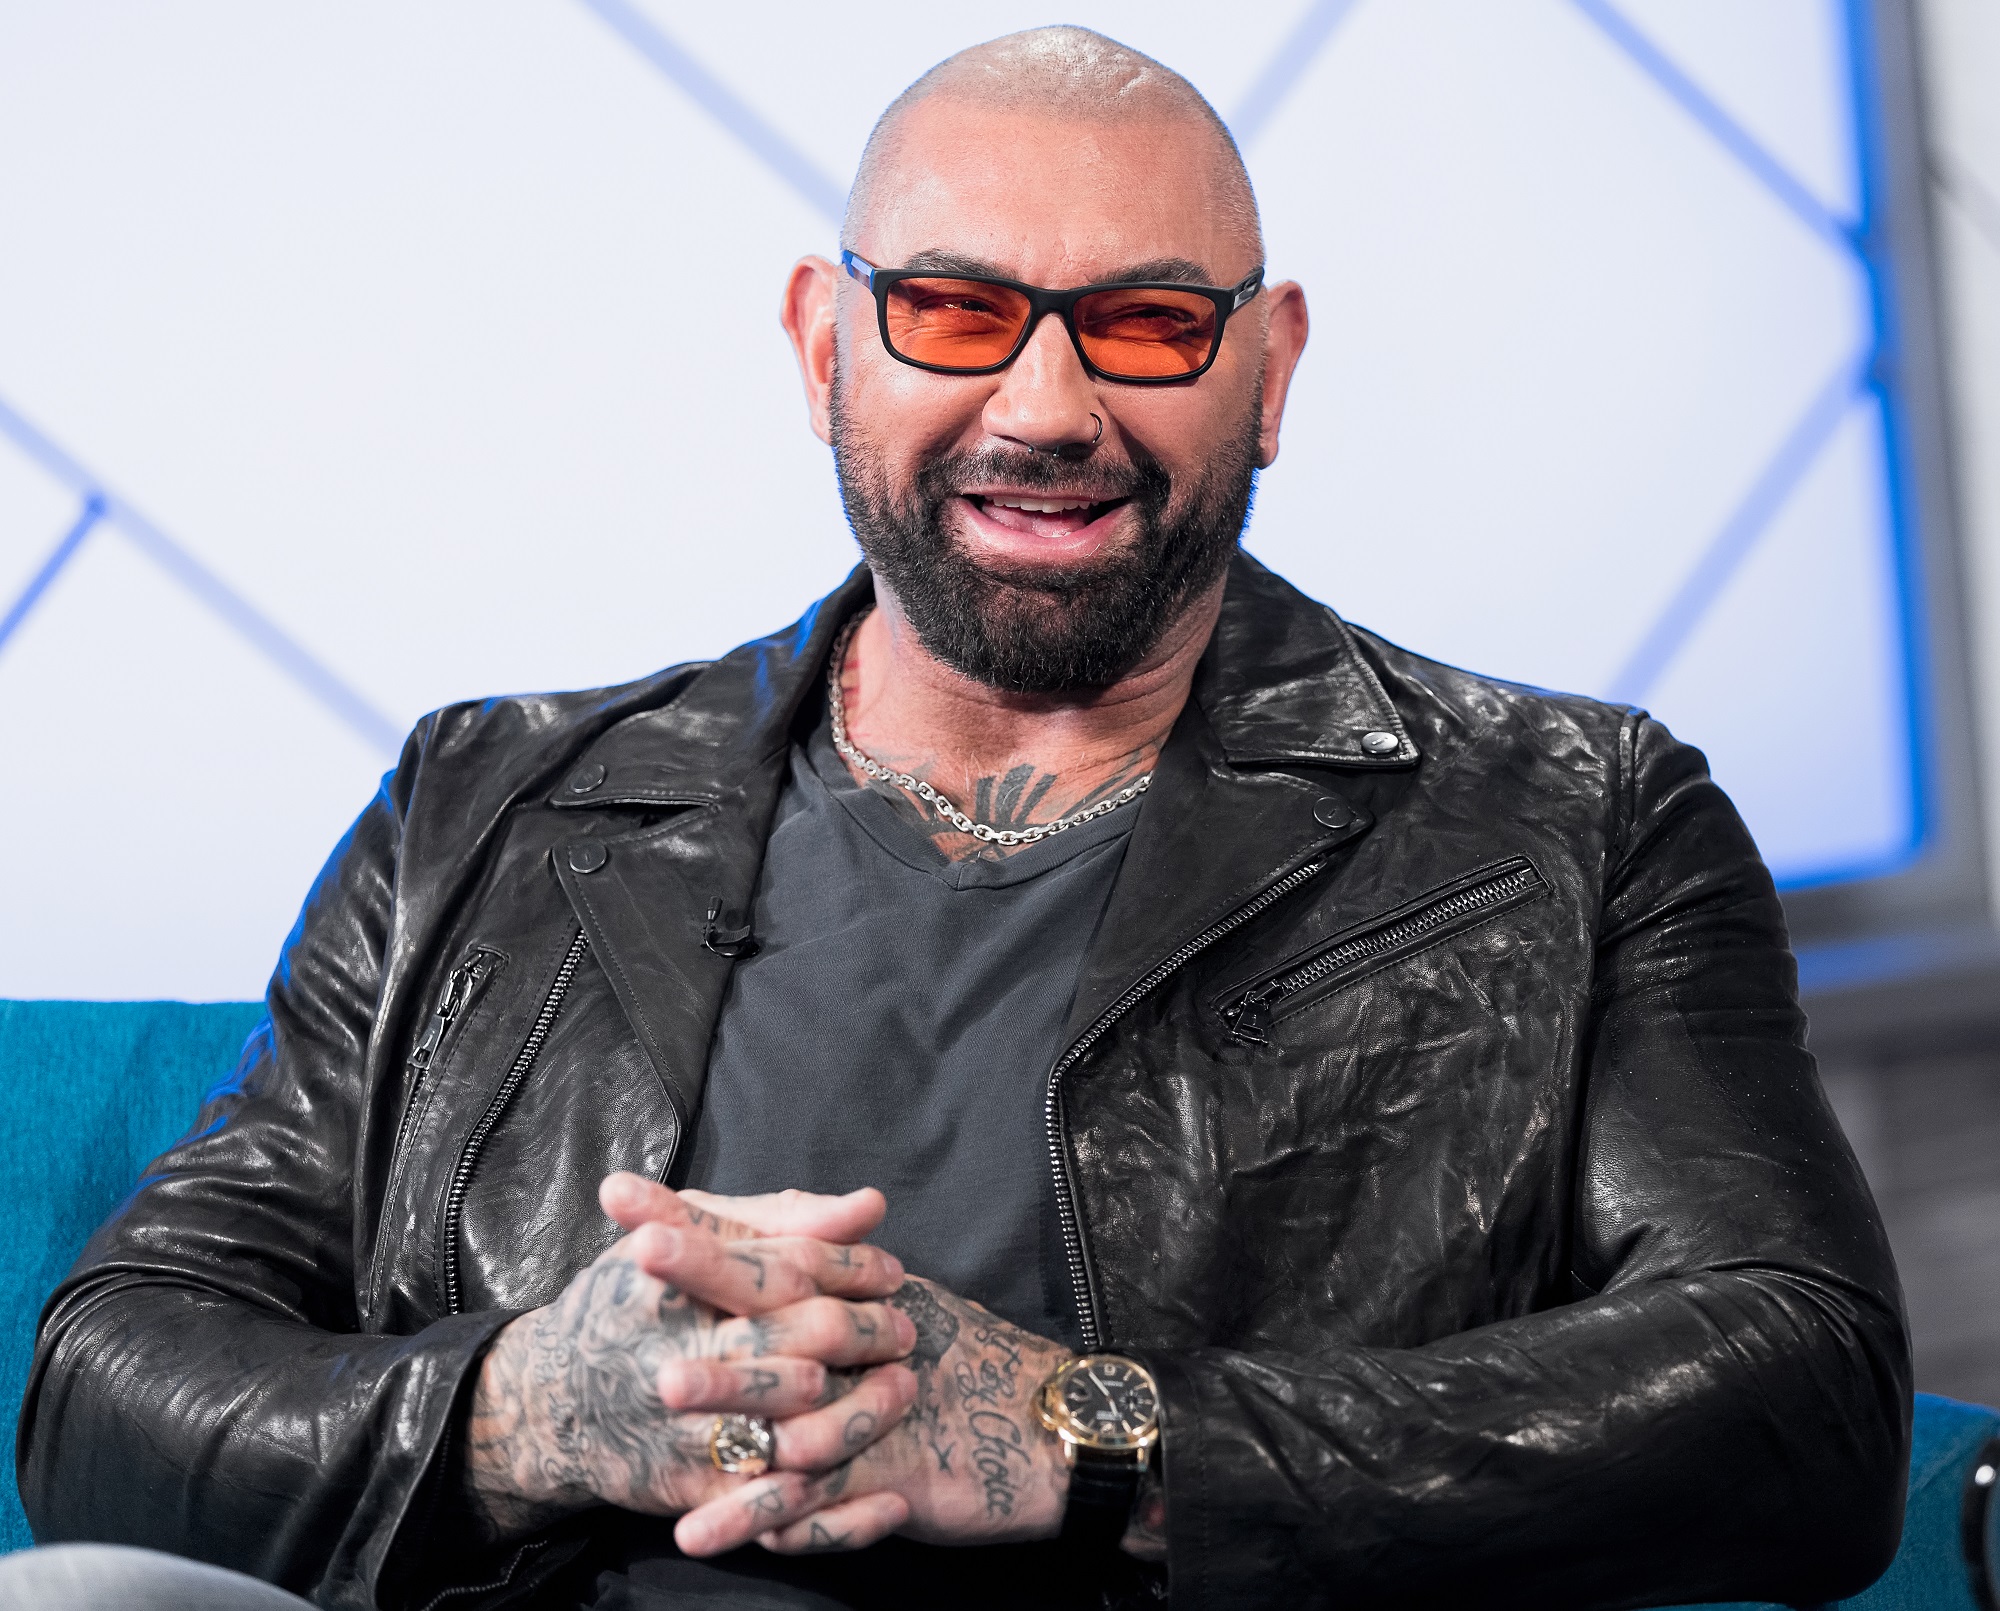 Is The Rock a Good Actor? Dave Bautista Says ‘F*ck No’